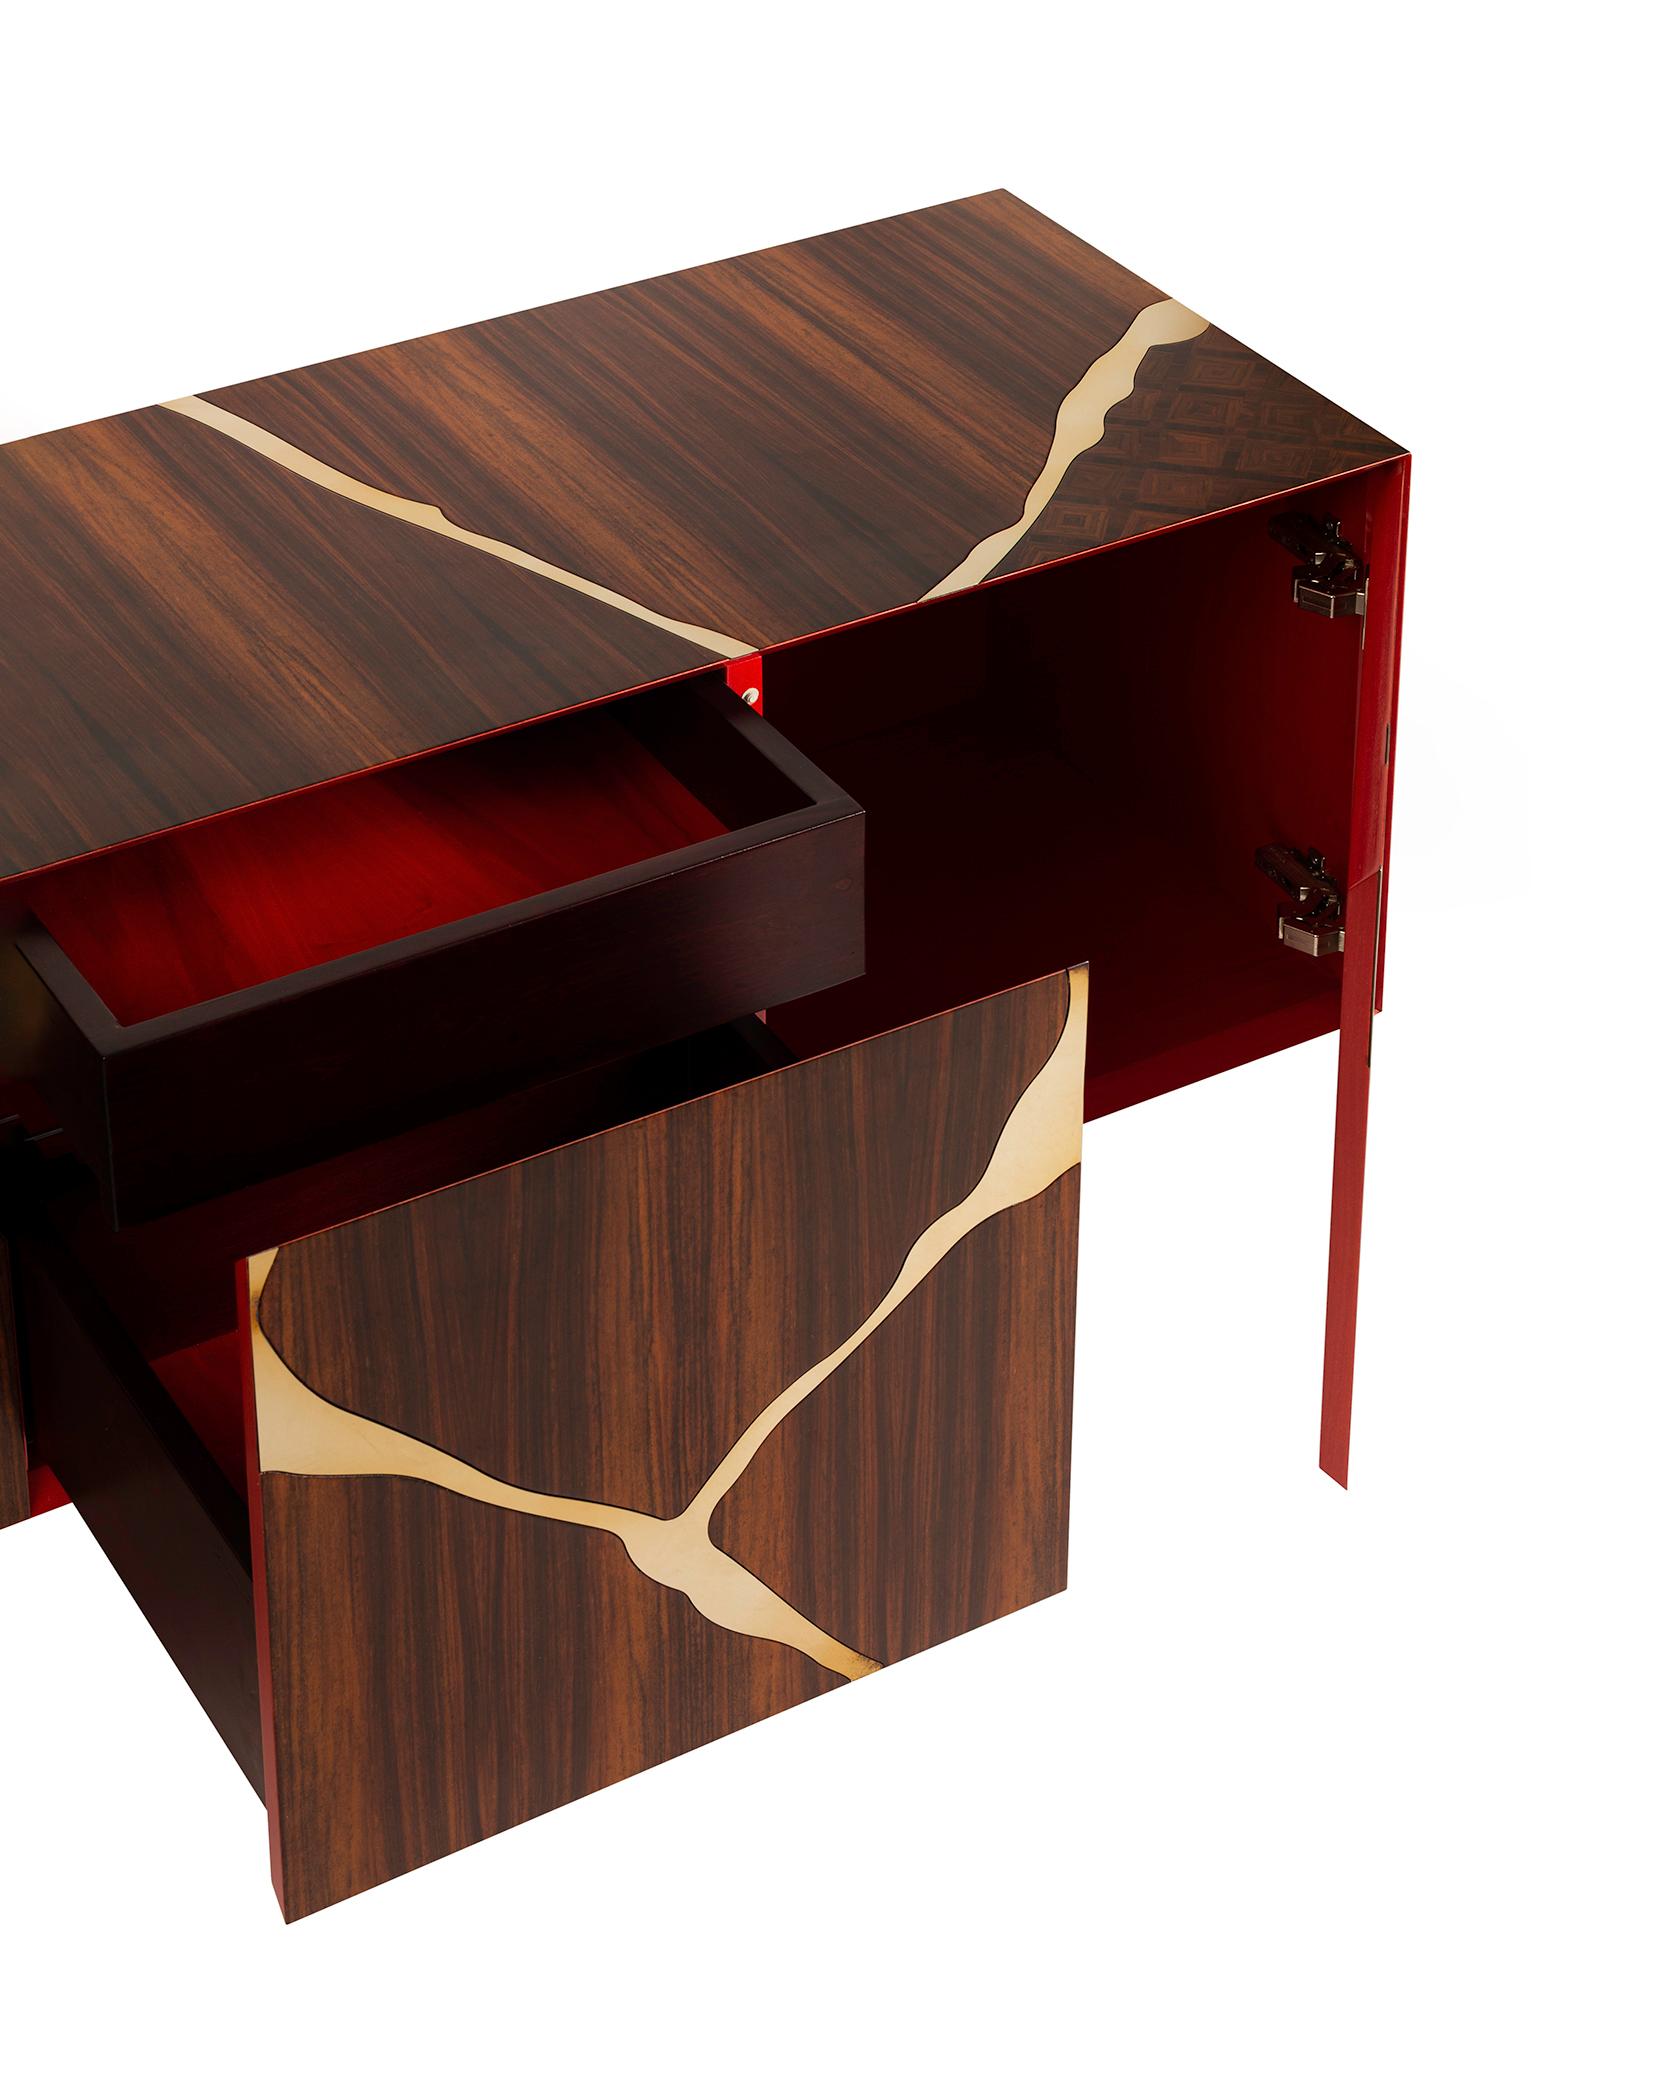 Italian 21st Century Frammenti Inlaid Sideboard in Rosewood, Birch, Steel, Made in Italy For Sale